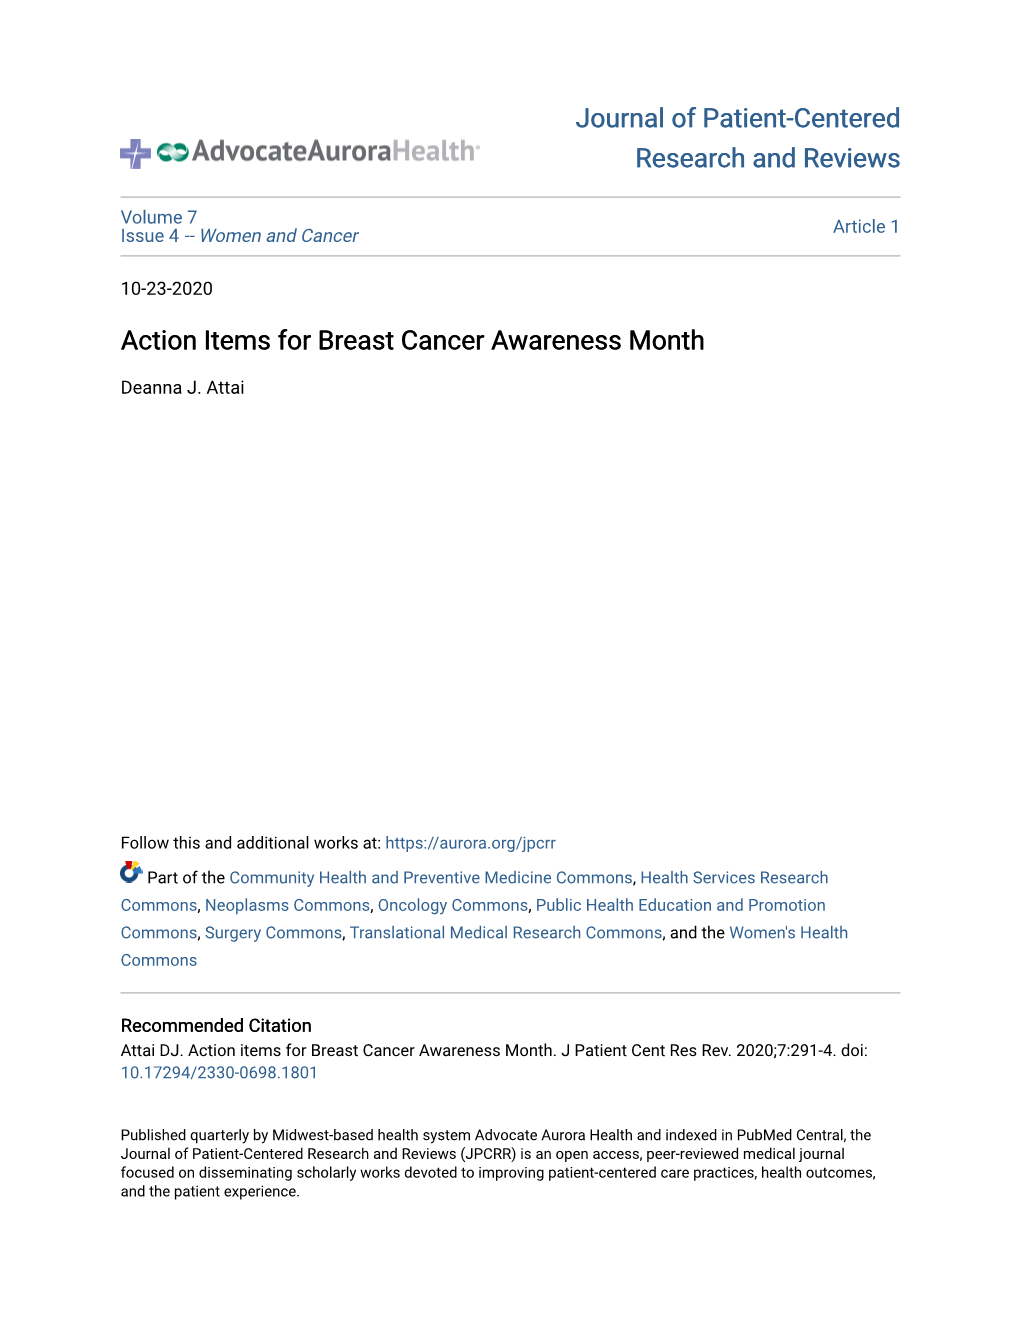 Action Items for Breast Cancer Awareness Month